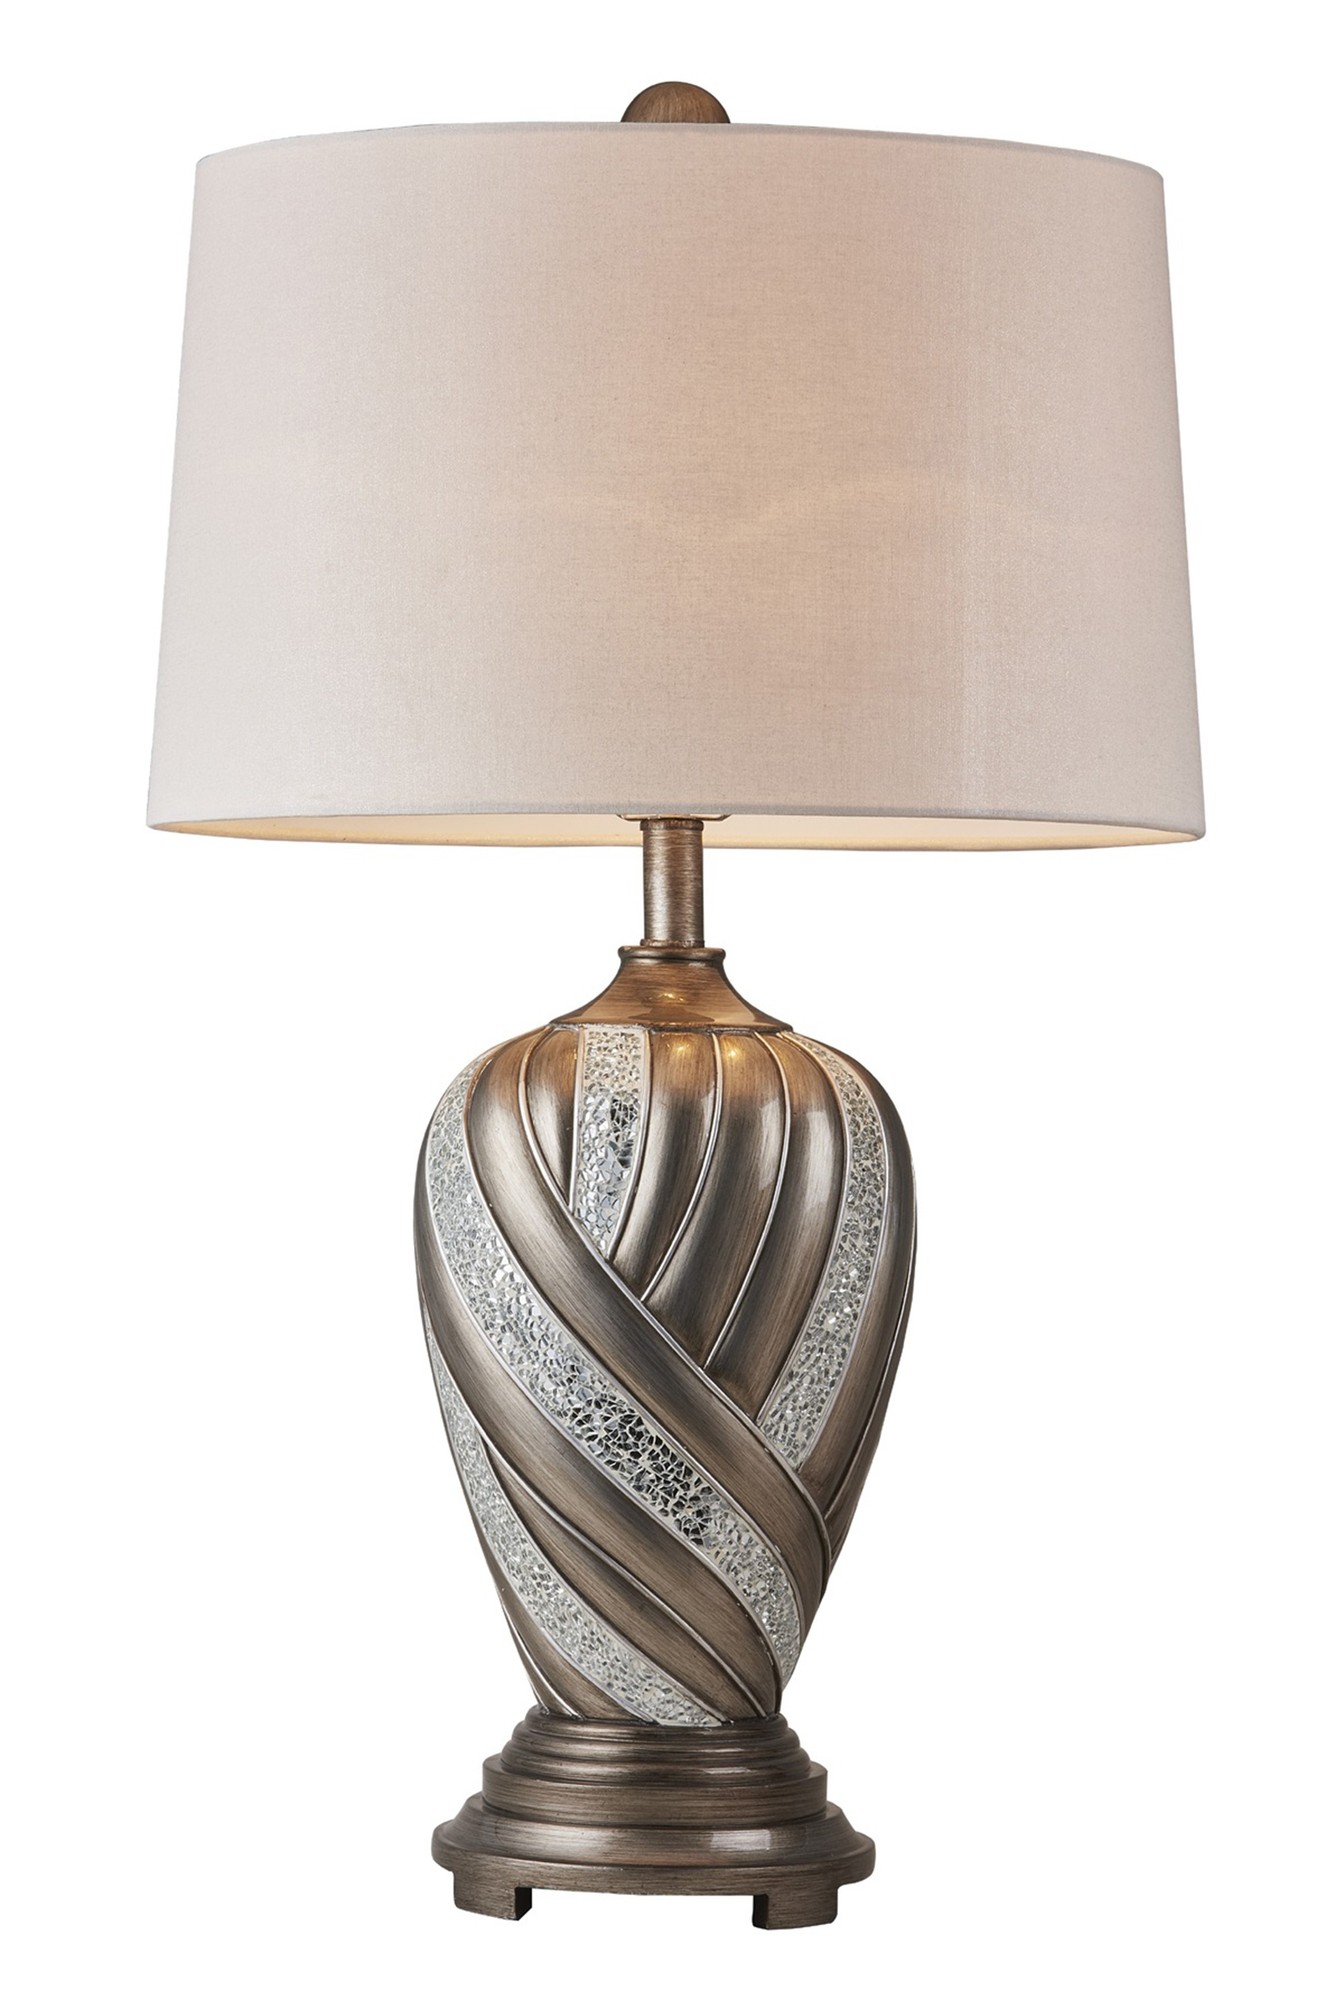 Primo Tall Silver Swirl Pattern Table Lamp